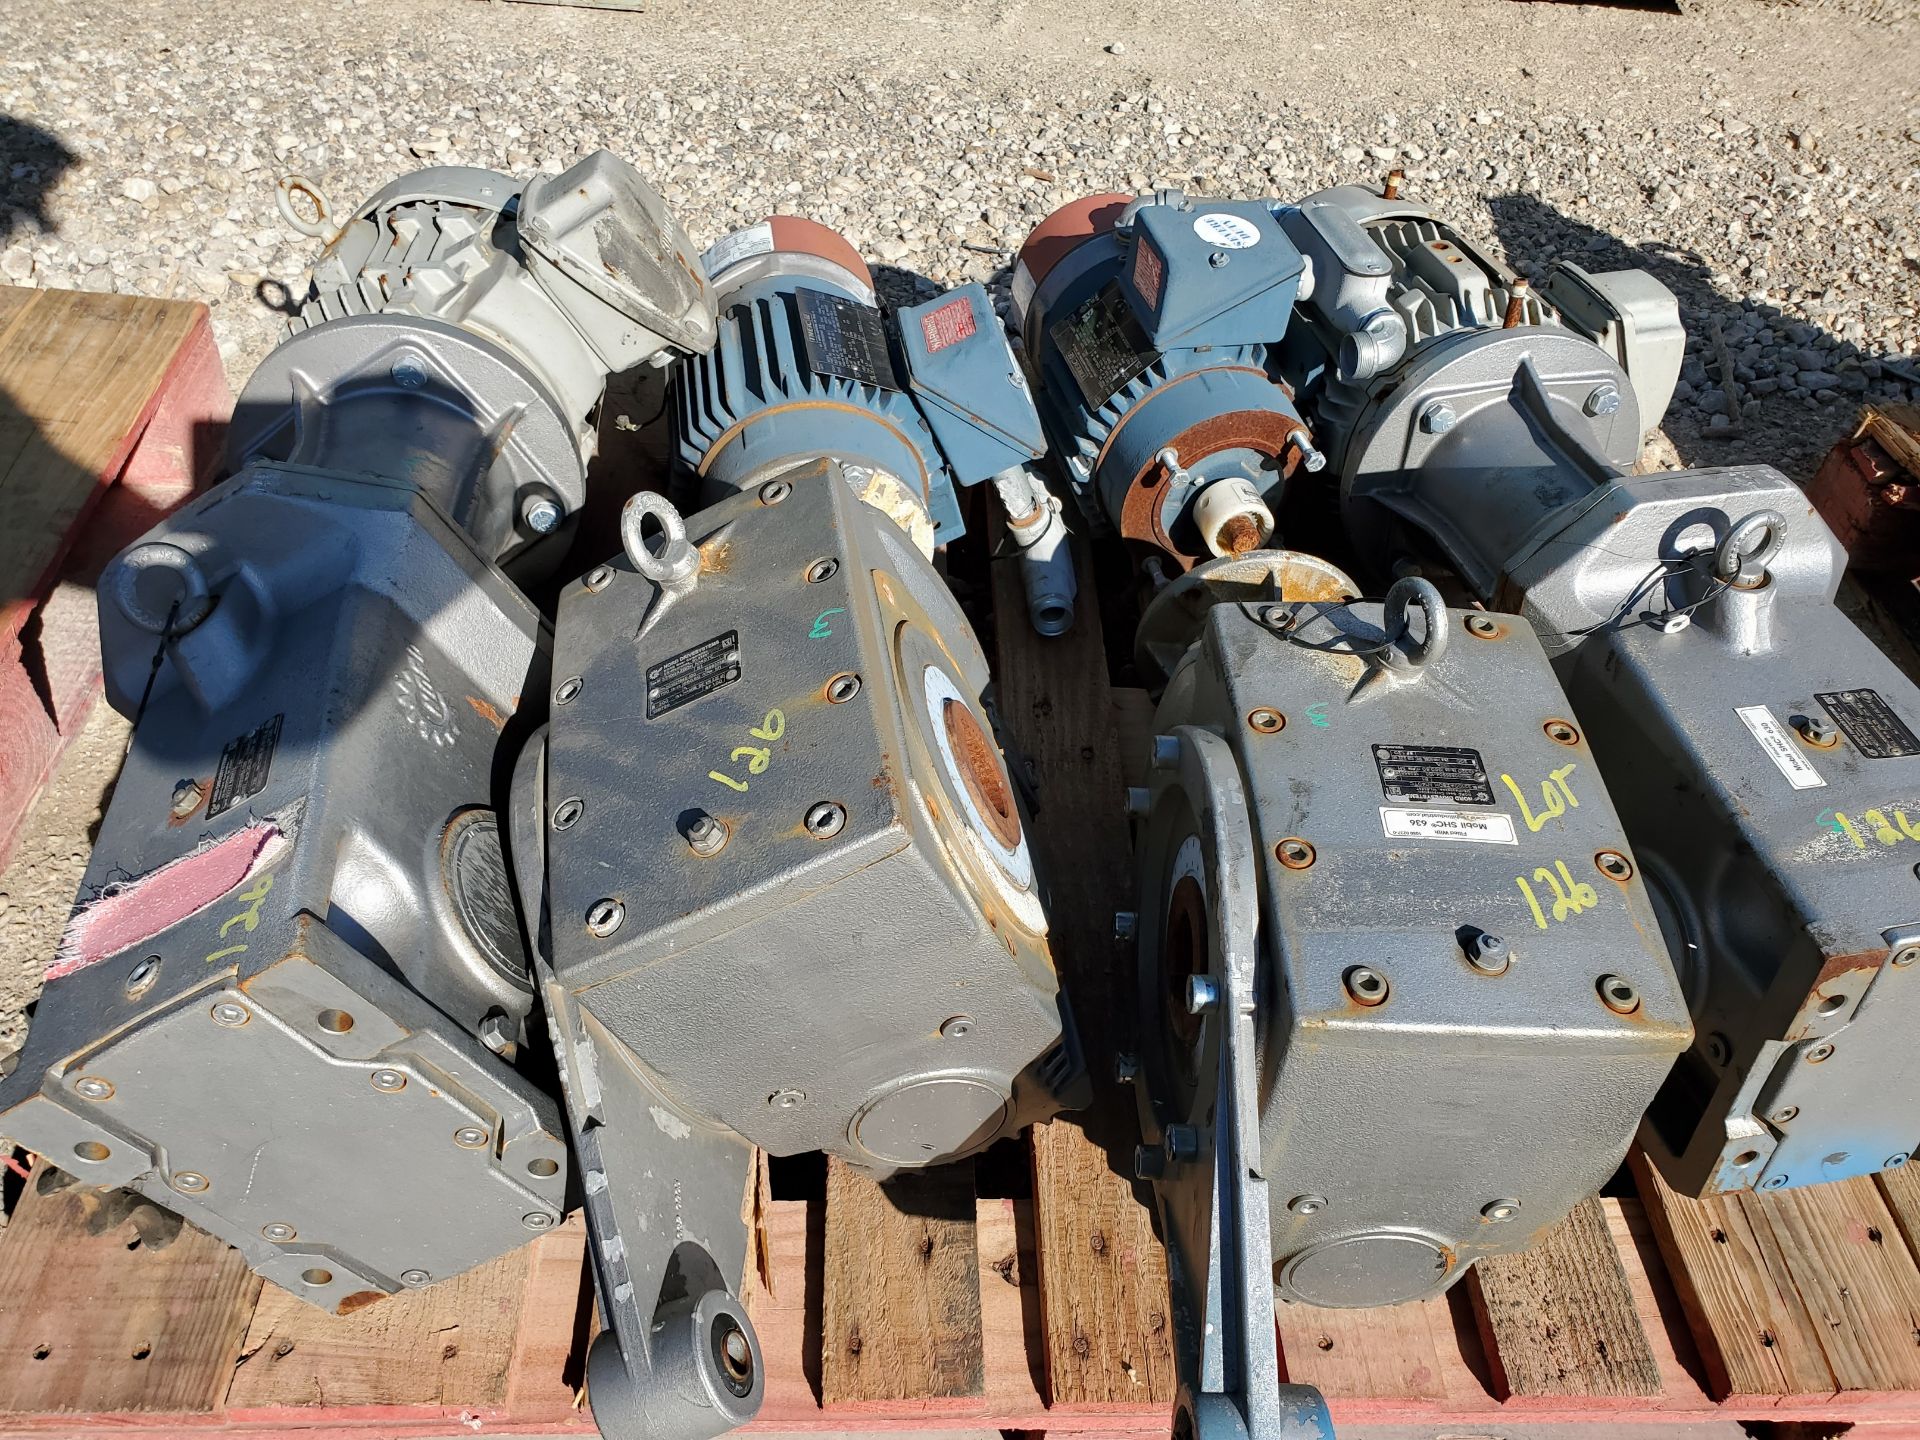 (4) NORD DRIVESYSTEMS 25.39:1 GEAR REDUCERS WITH GE 1 HP ELECTRIC MOTORS - Image 2 of 8